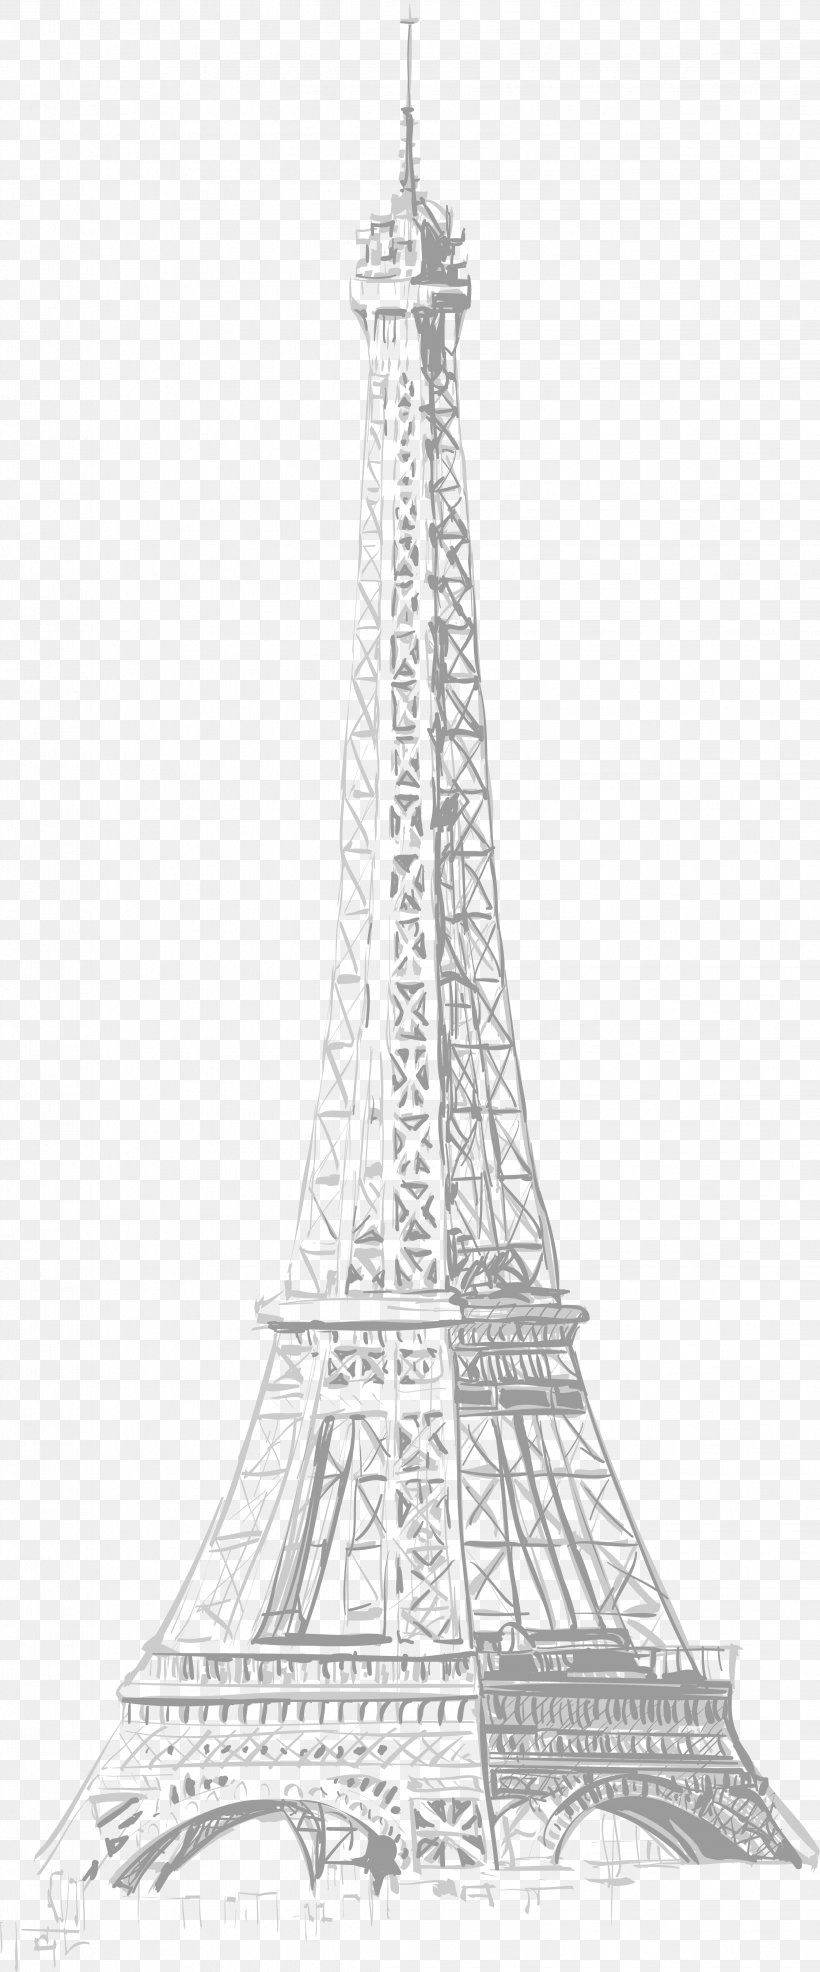 Eiffel Tower Images | Free HD Background Photos, PNGs, Vectors &  Illustrations - rawpixel